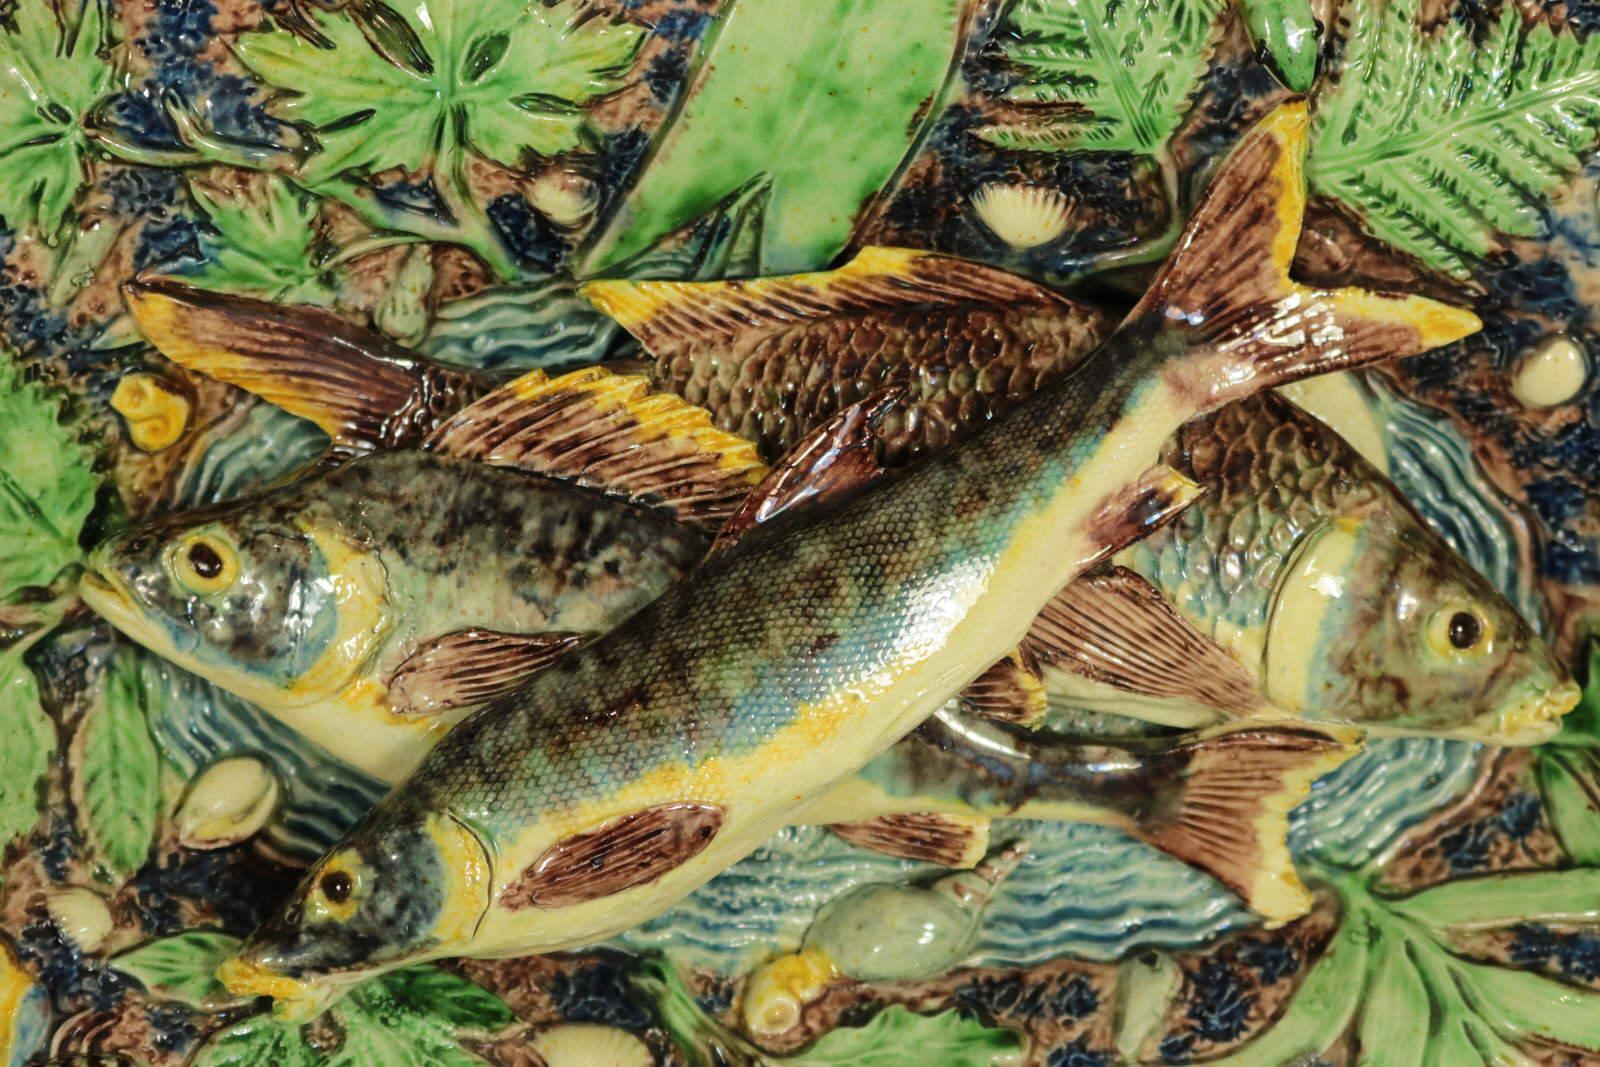 School of Paris French Palissy Majolica wall platter which features three overlapping fish on a water-effect ground, to the centre. A lizard, shellfish, insects and leaves around the rim. Coloration: green, blue, brown, are predominant. Attribution,